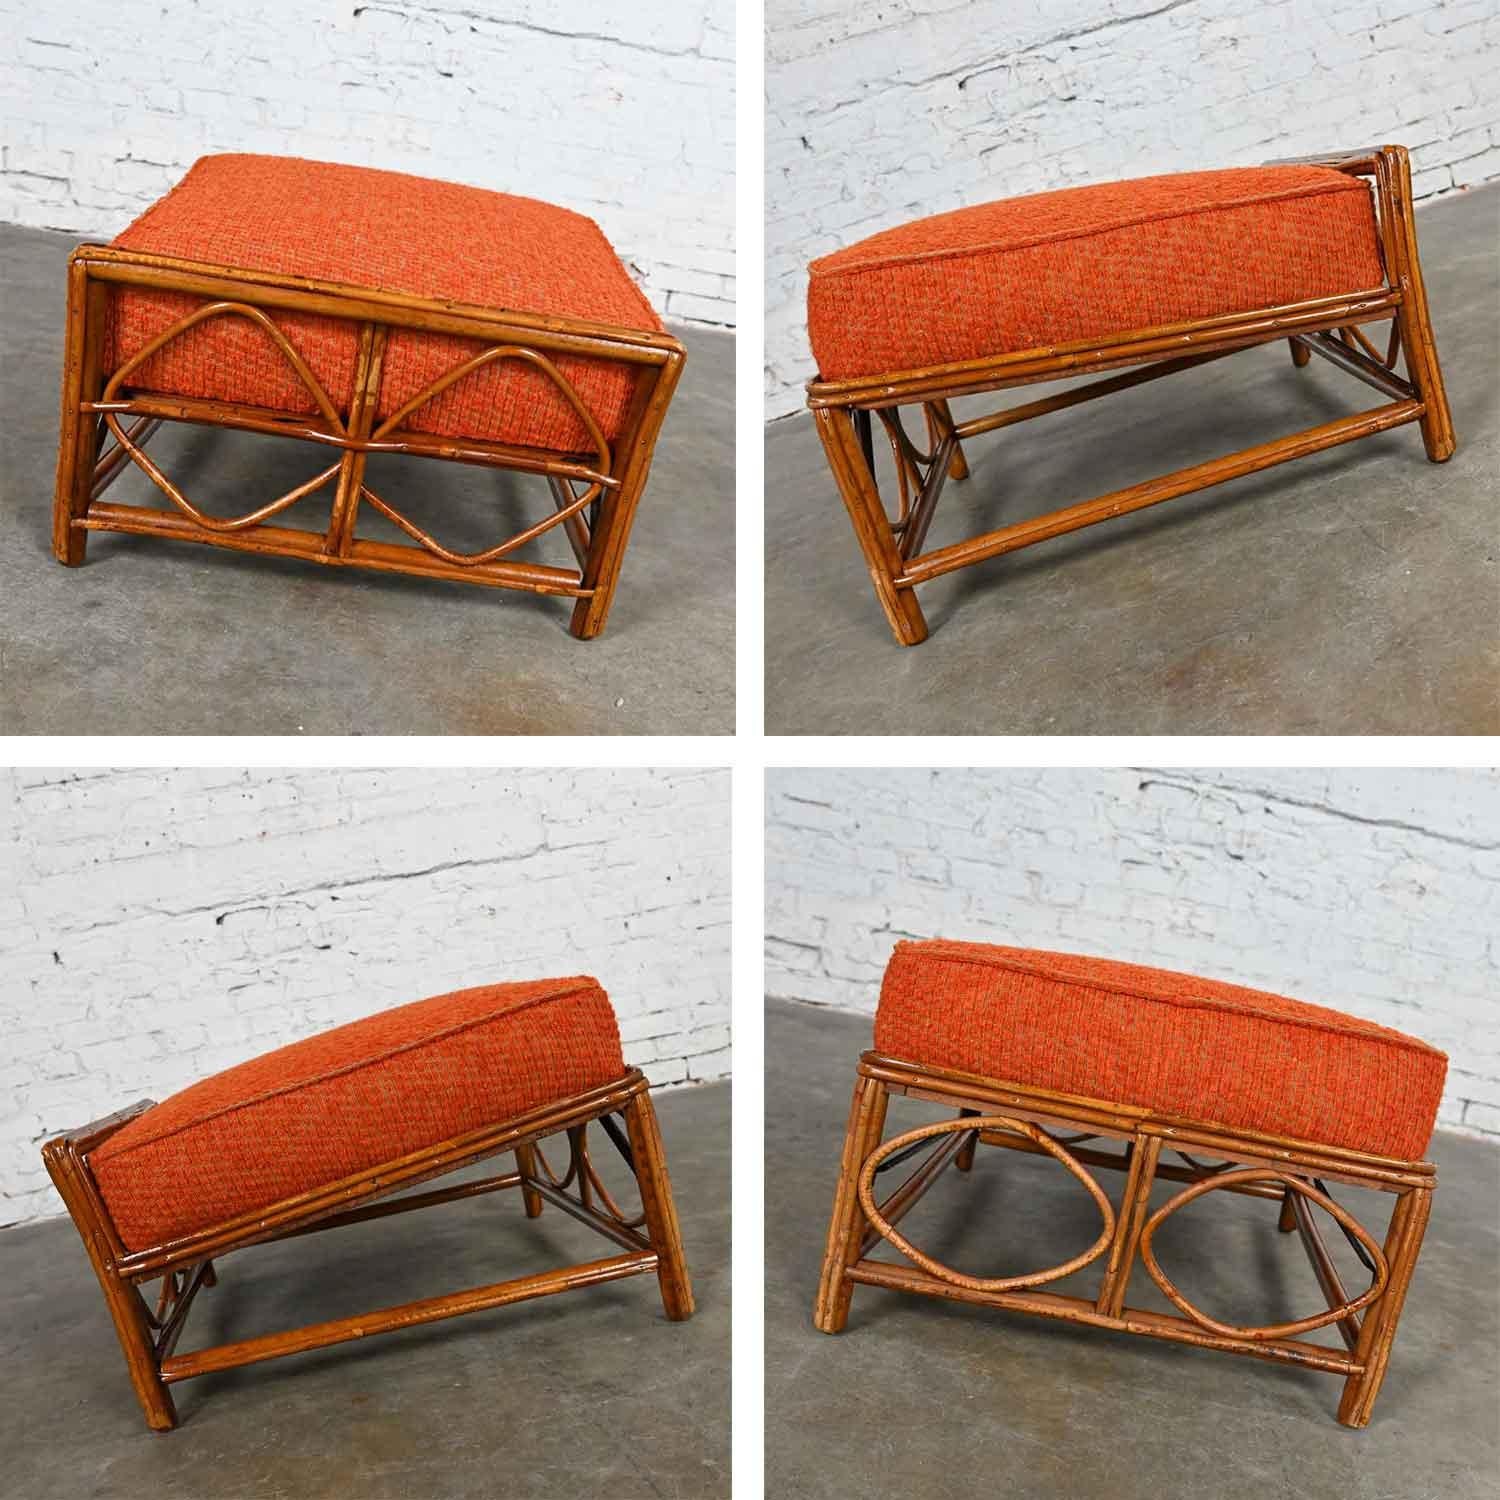 Rattan Lounge Chair & Ottoman Orange Fabric Cushions by Helmers Manufacturing Co 8